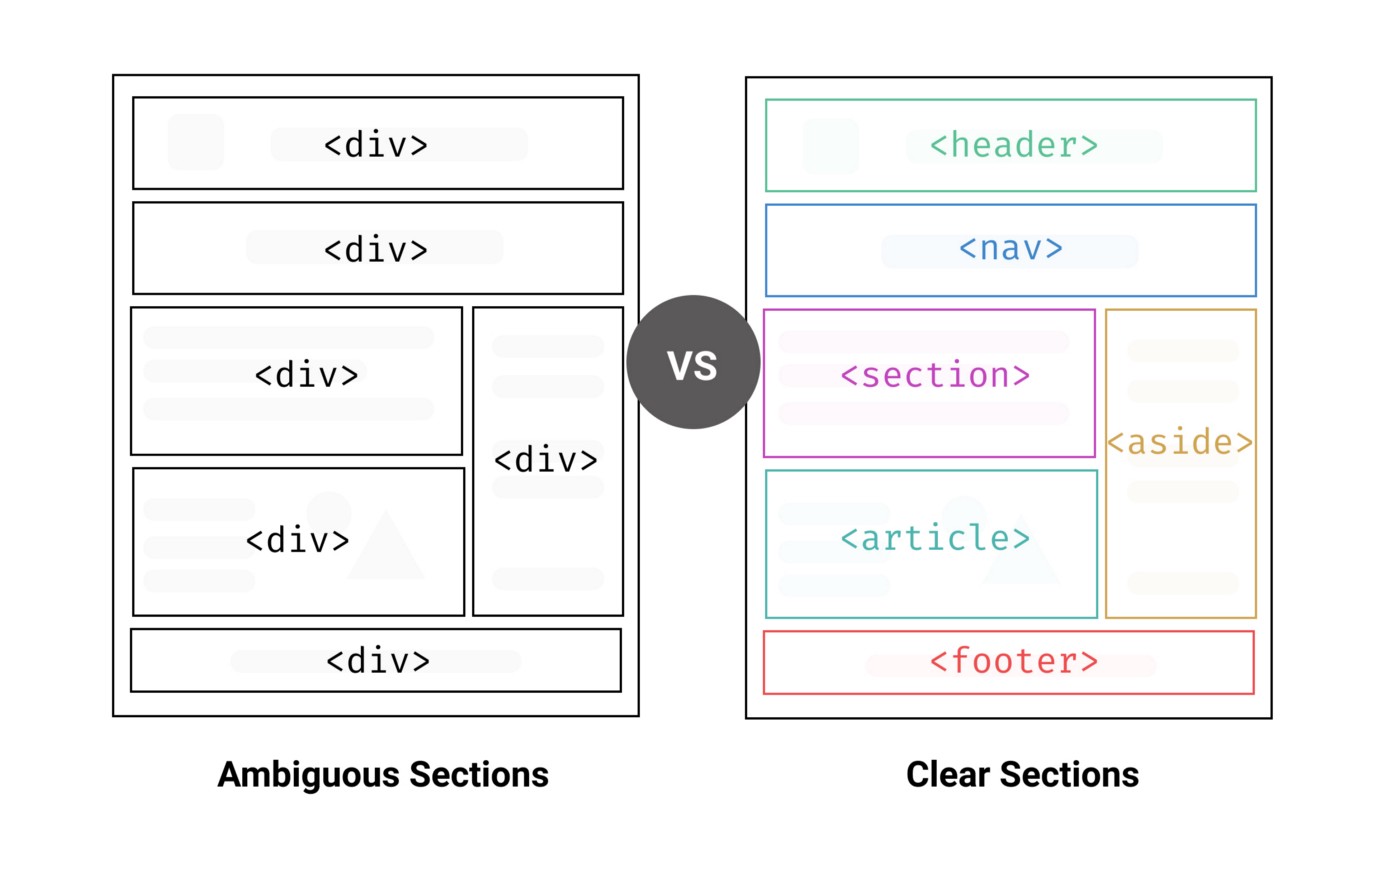 Why one should use HTML5 semantics over divs